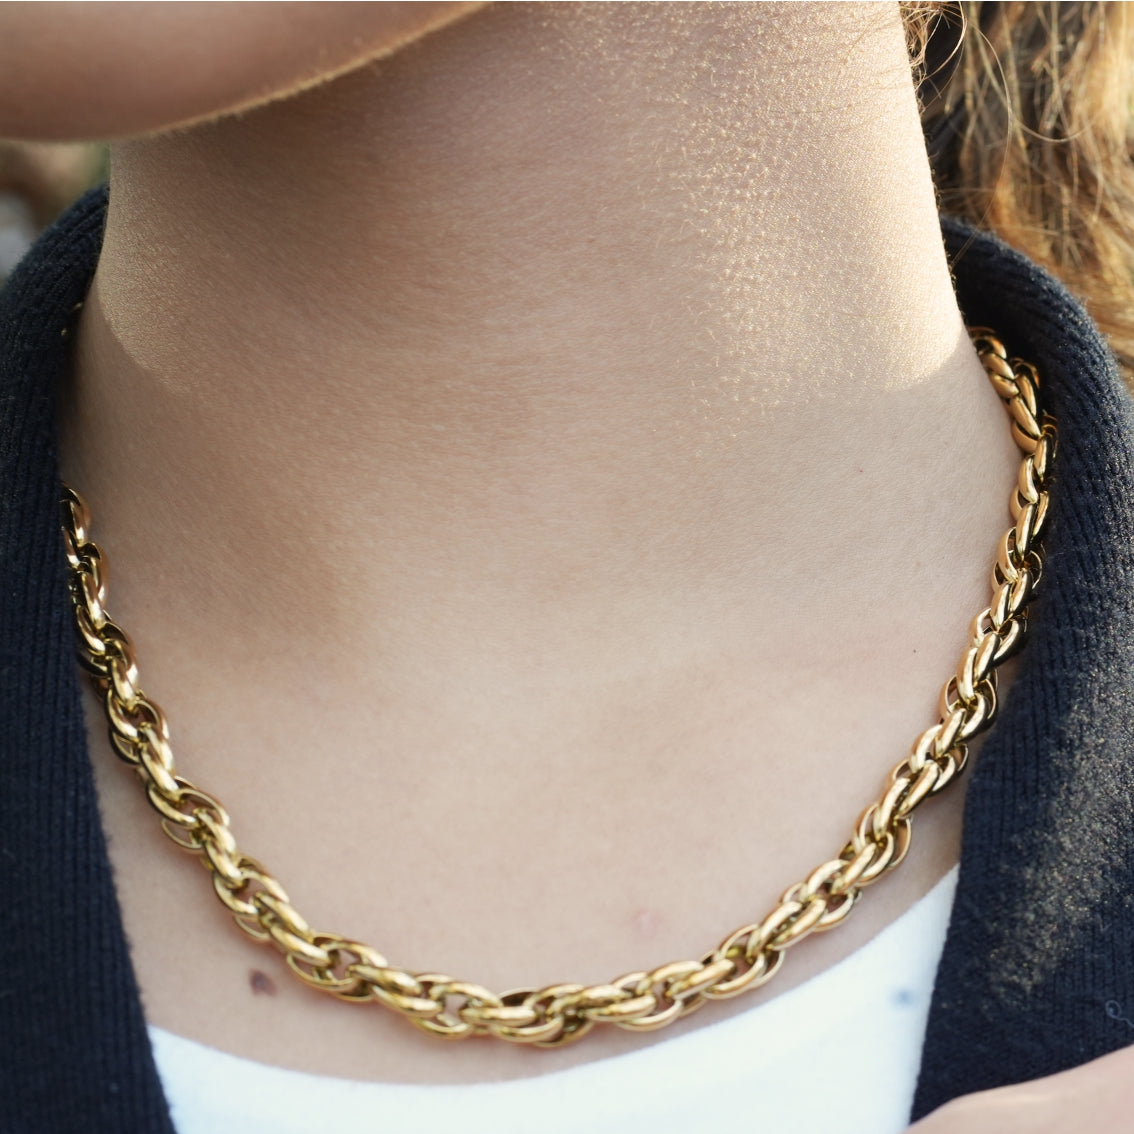 Style ISLINGTON: Chunky Intricate Multi-Link Chain Necklace